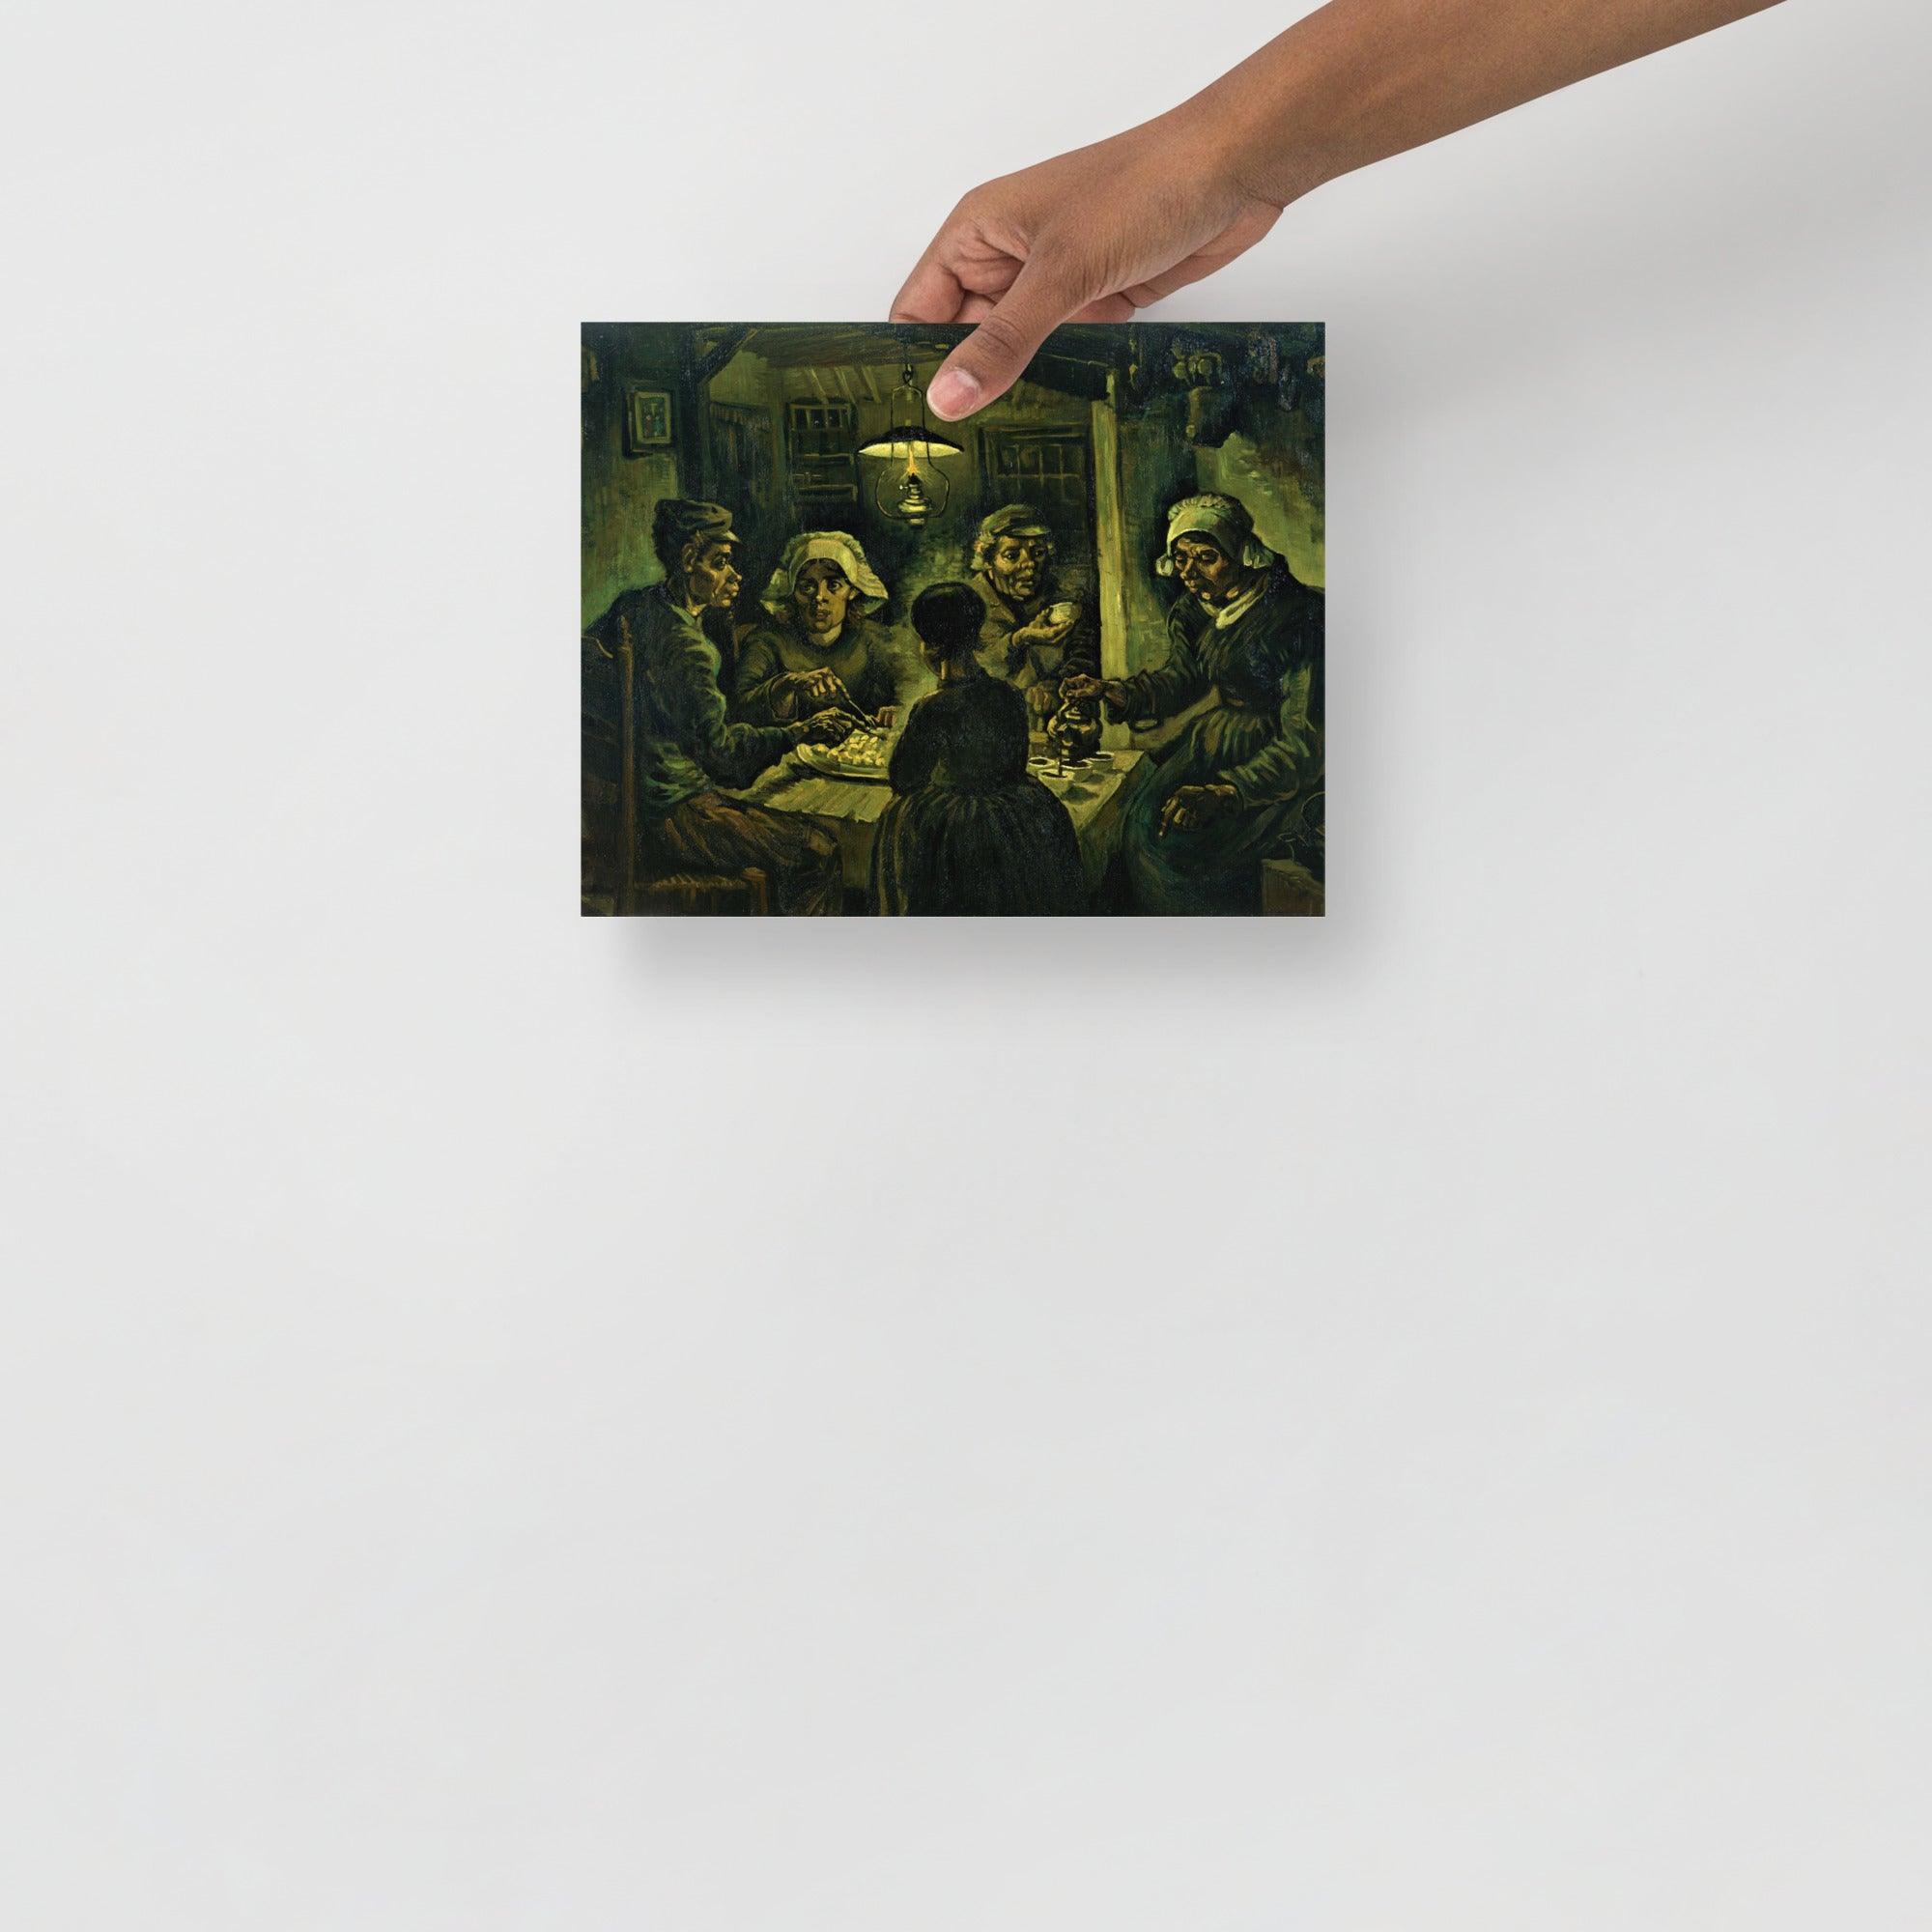 The Potato Eaters by Vincent van Gogh poster on a plain backdrop in size 8x10”.